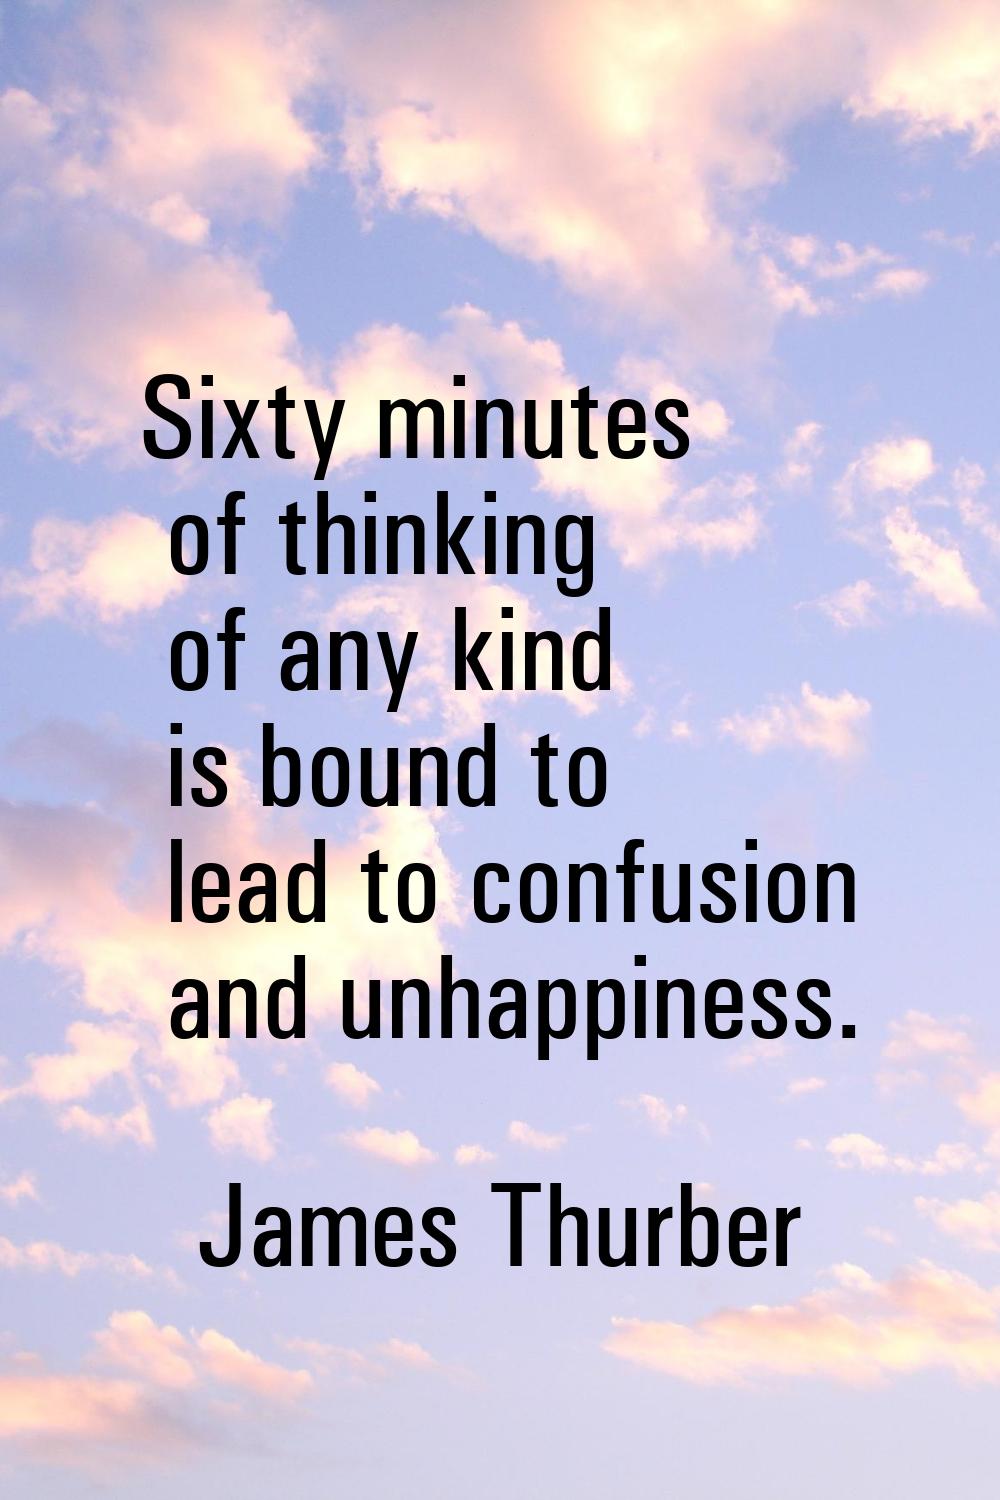 Sixty minutes of thinking of any kind is bound to lead to confusion and unhappiness.